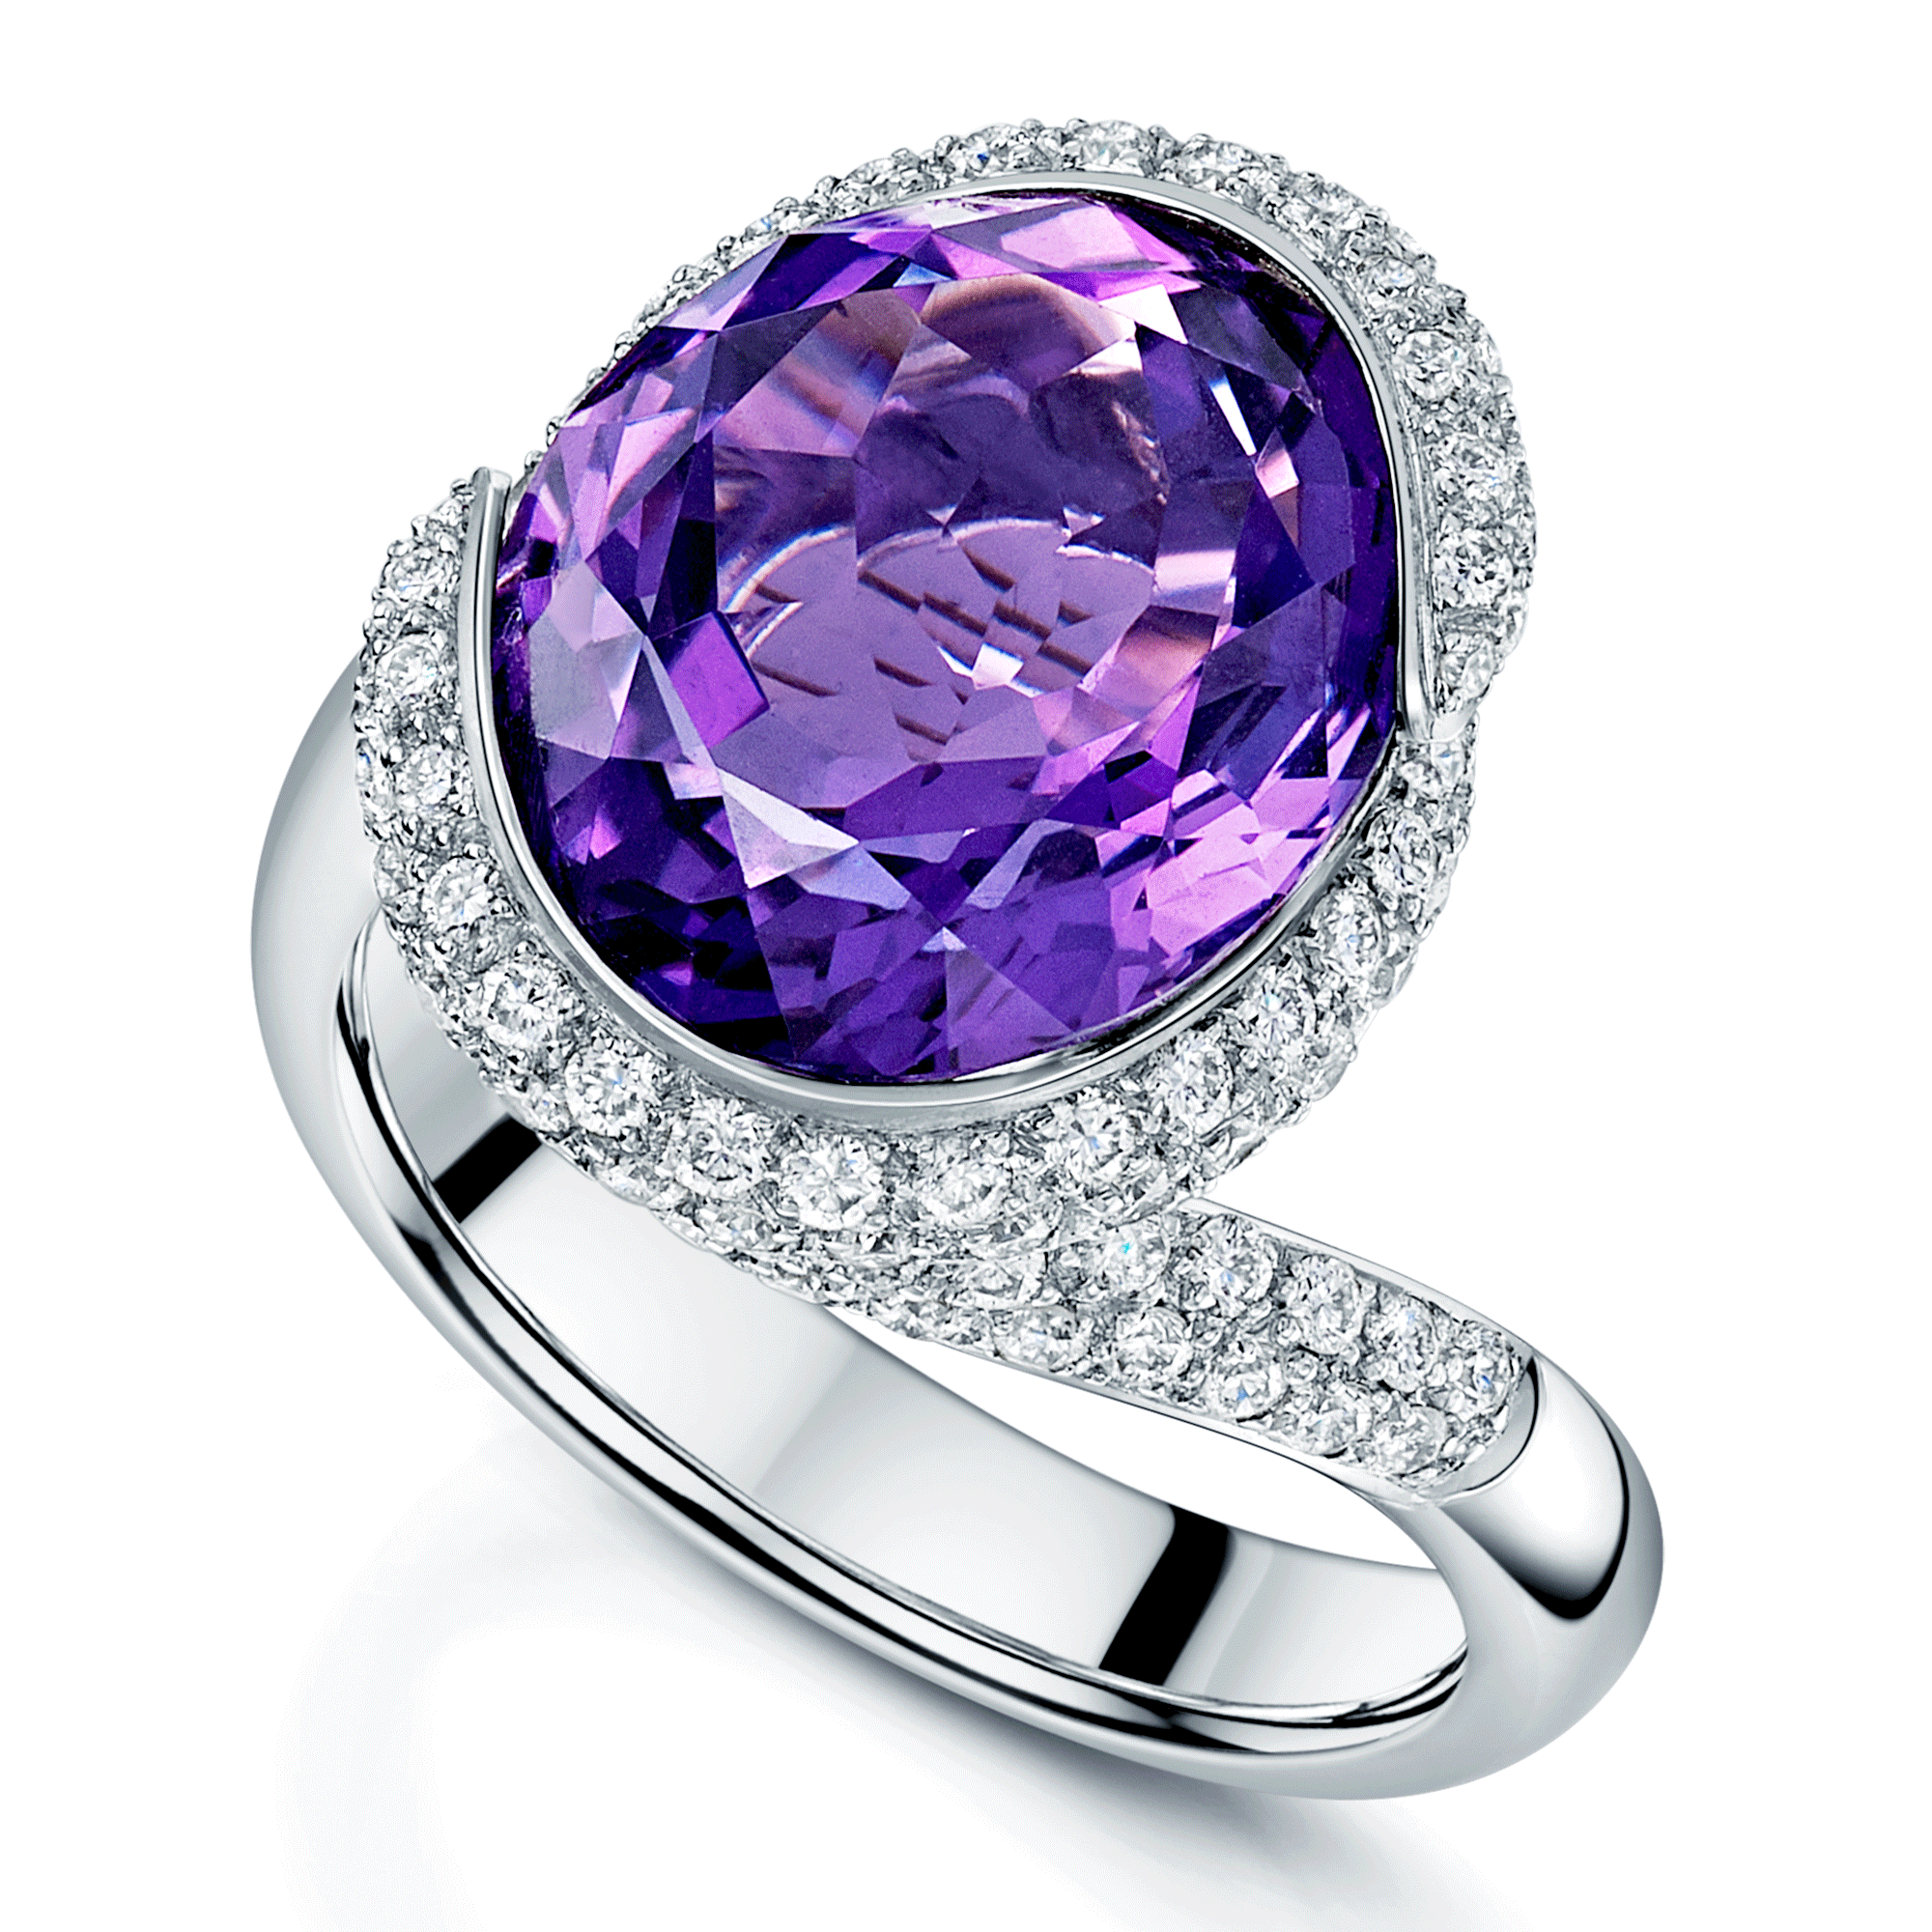 18ct White Gold Oval Cut Amethyst And Diamond Swirl Design Ring